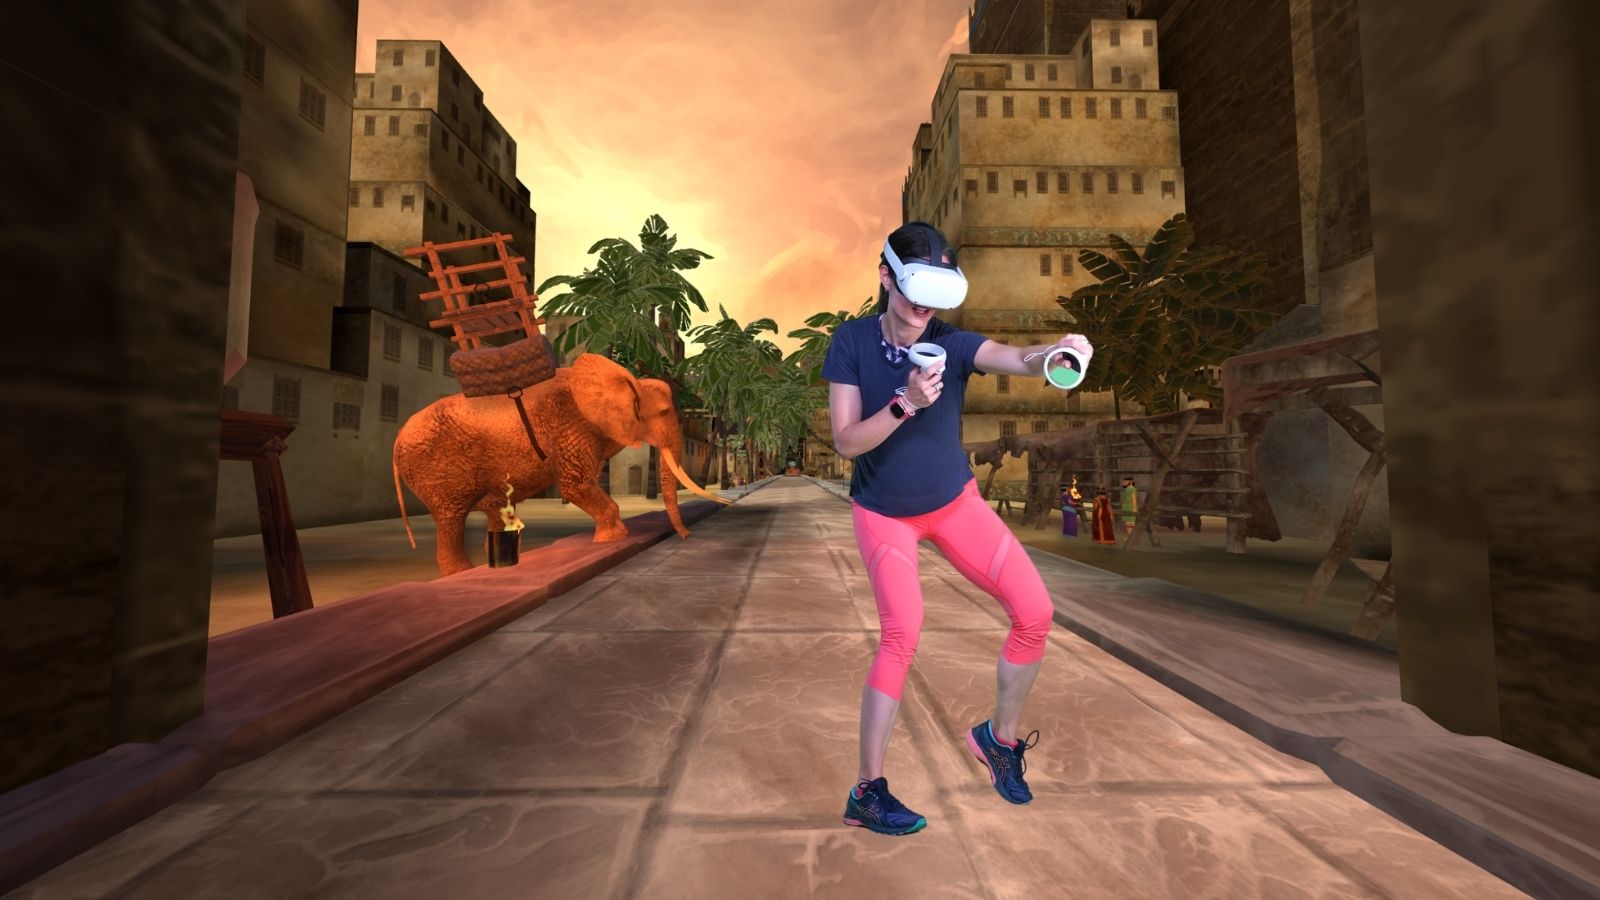 You have to try this Oculus Quest VR Fitness game